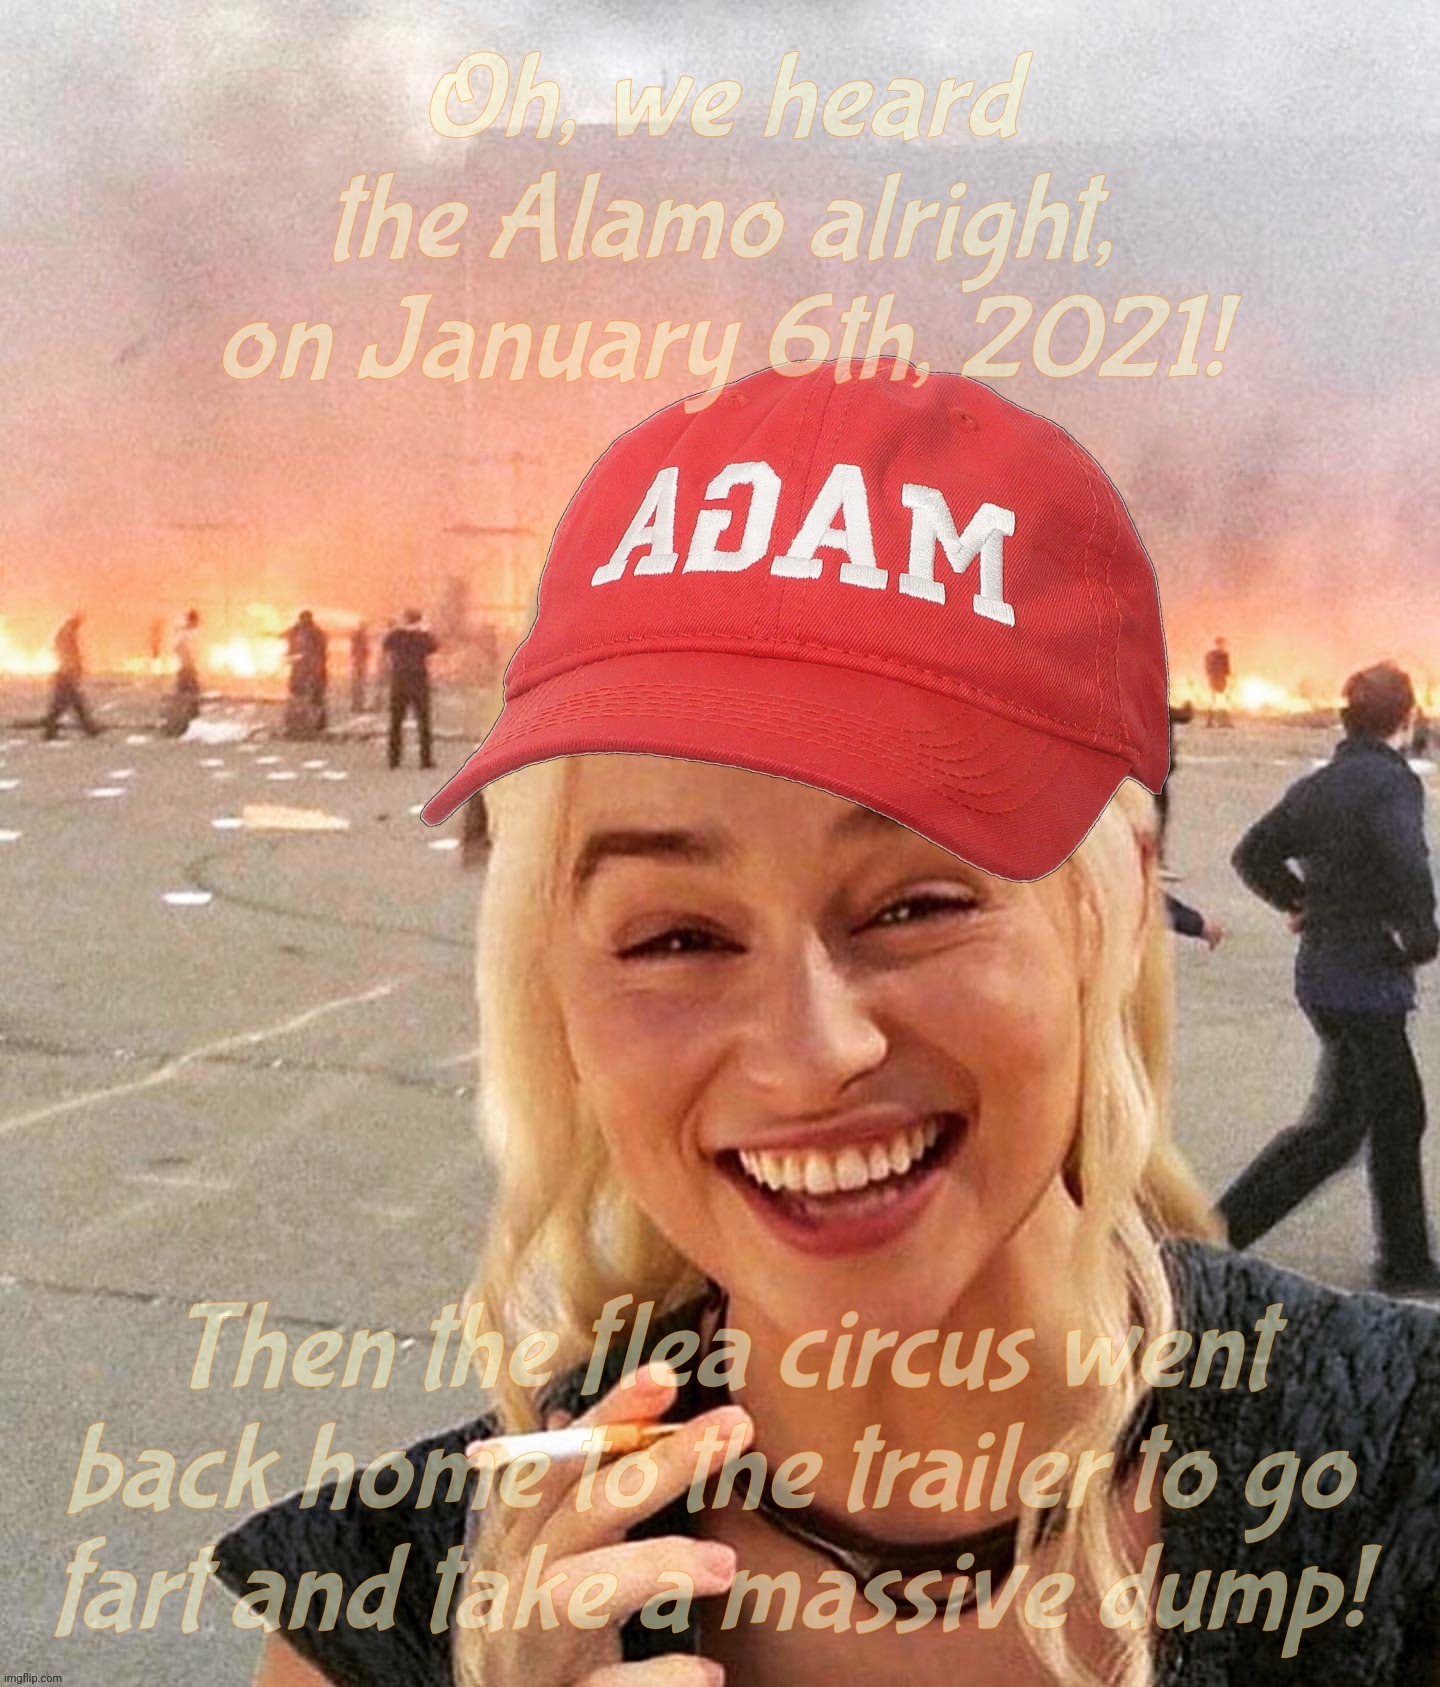 Remember the Alamo? They lost | Oh, we heard the Alamo alright, on January 6th, 2021! Then the flea circus went back home to the trailer to go 
fart and take a massive dump! | image tagged in disaster smoker girl maga edition,remember the alamo,capitol hill riot,january 6th,magat losers,magats | made w/ Imgflip meme maker